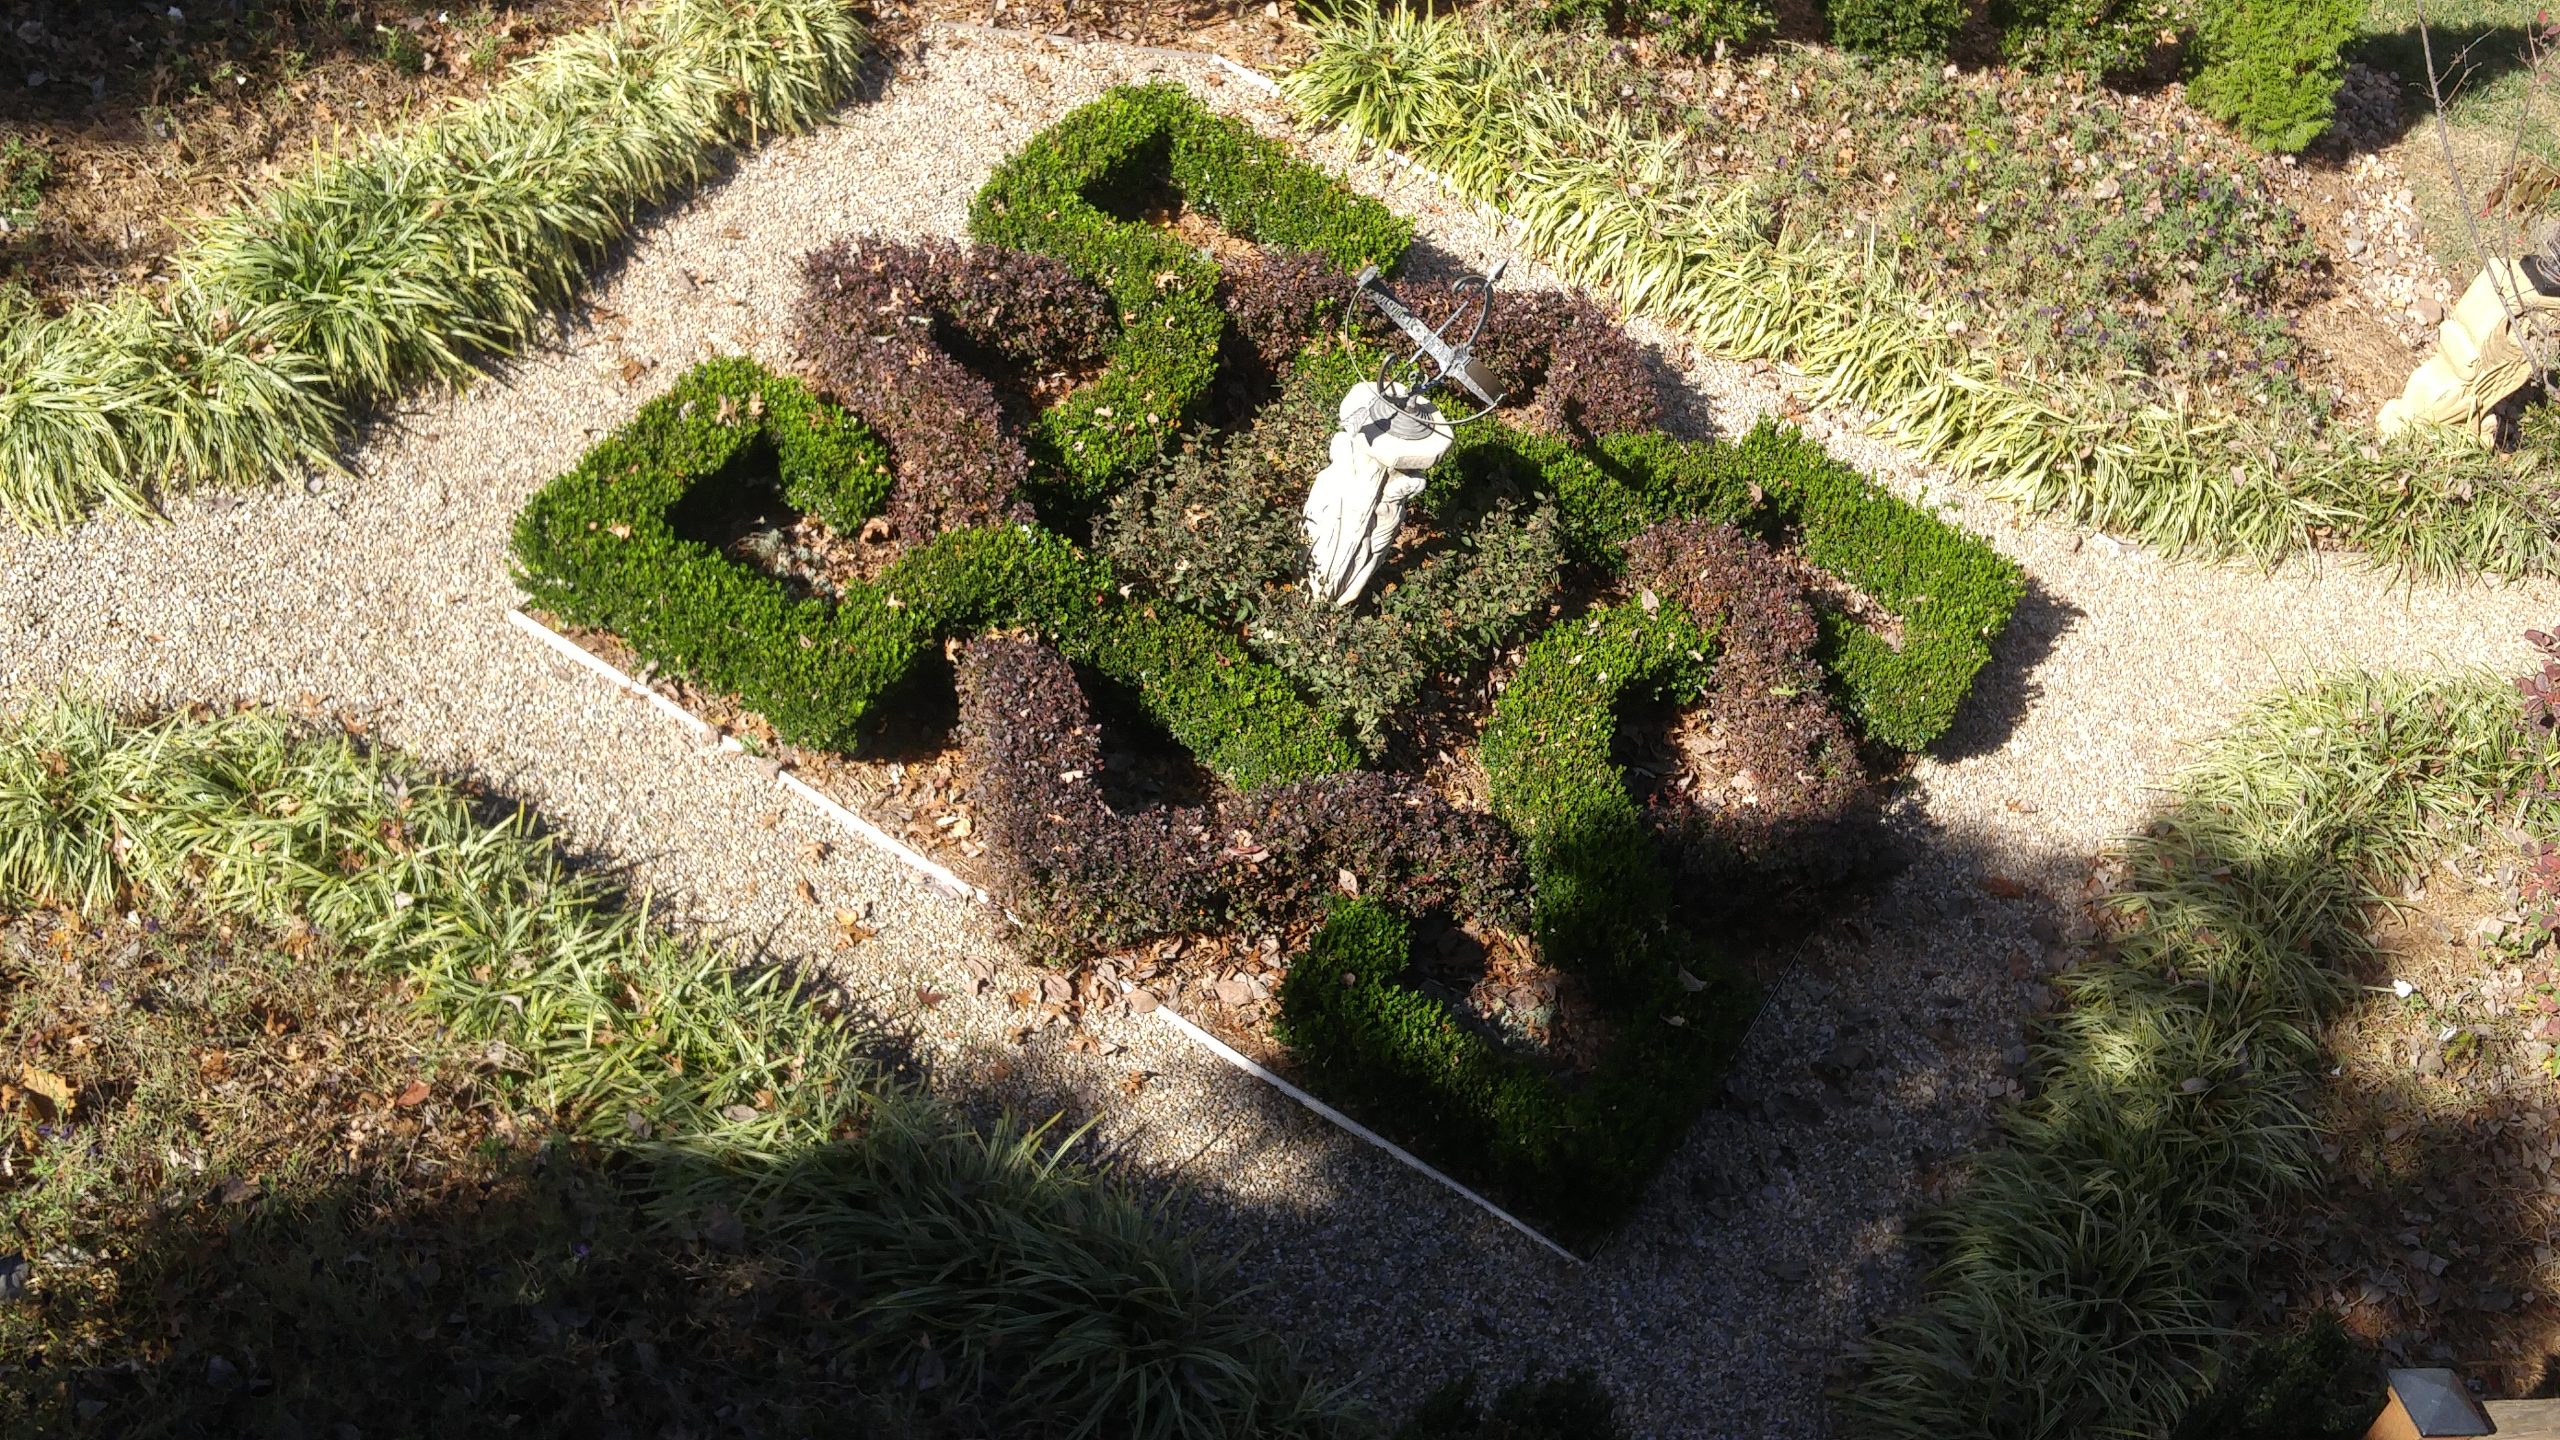 Elysium's Knot Garden (five years, overhead view, late fall)